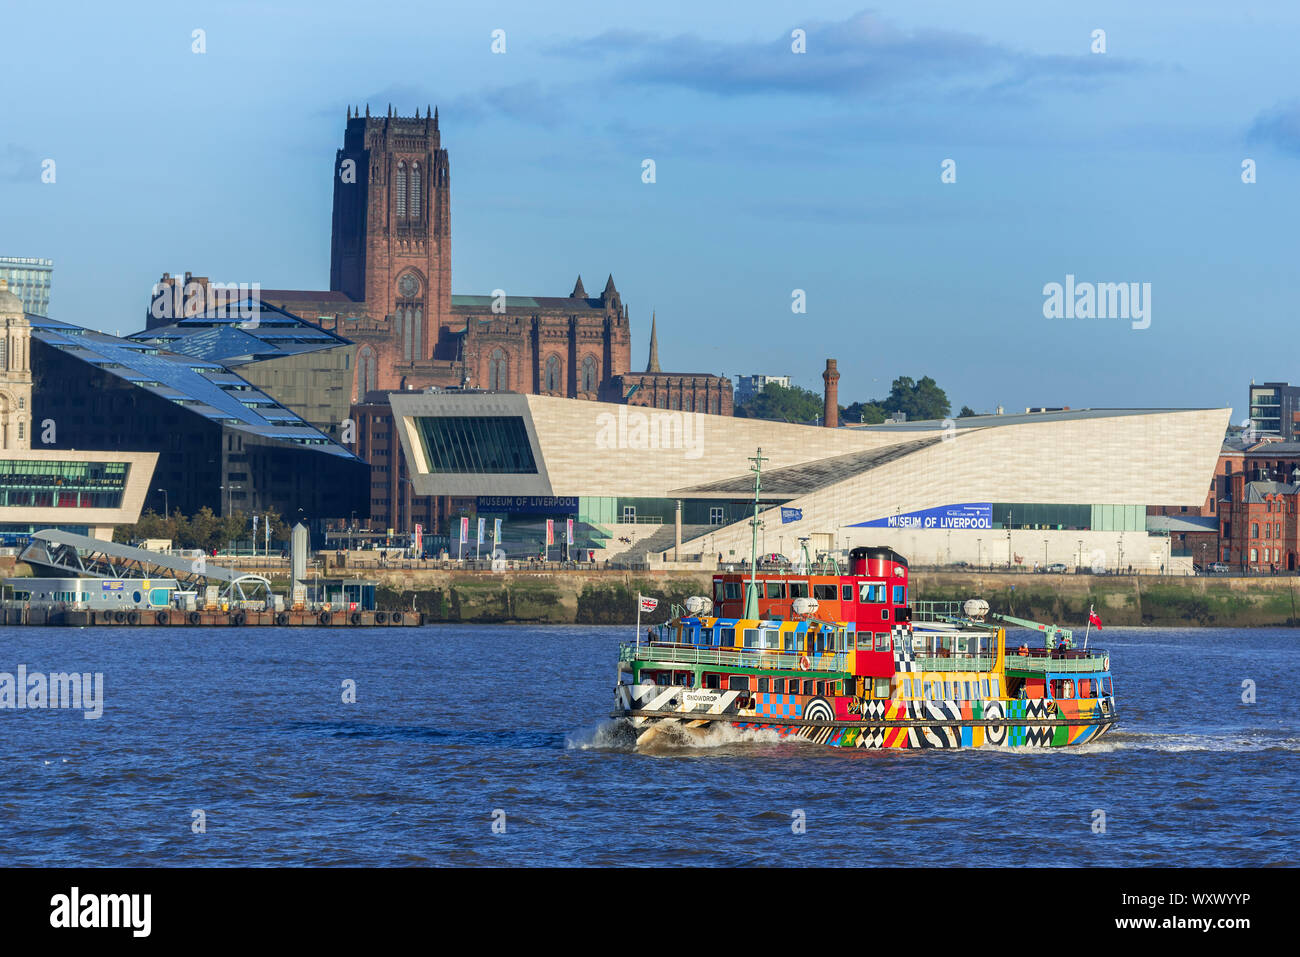 Liverpool waterfront in evening sunlight with the Anglican cathedral and Museum of Liverpool. Mersey ferry the Snowdrop. Dazzle ferry Stock Photo